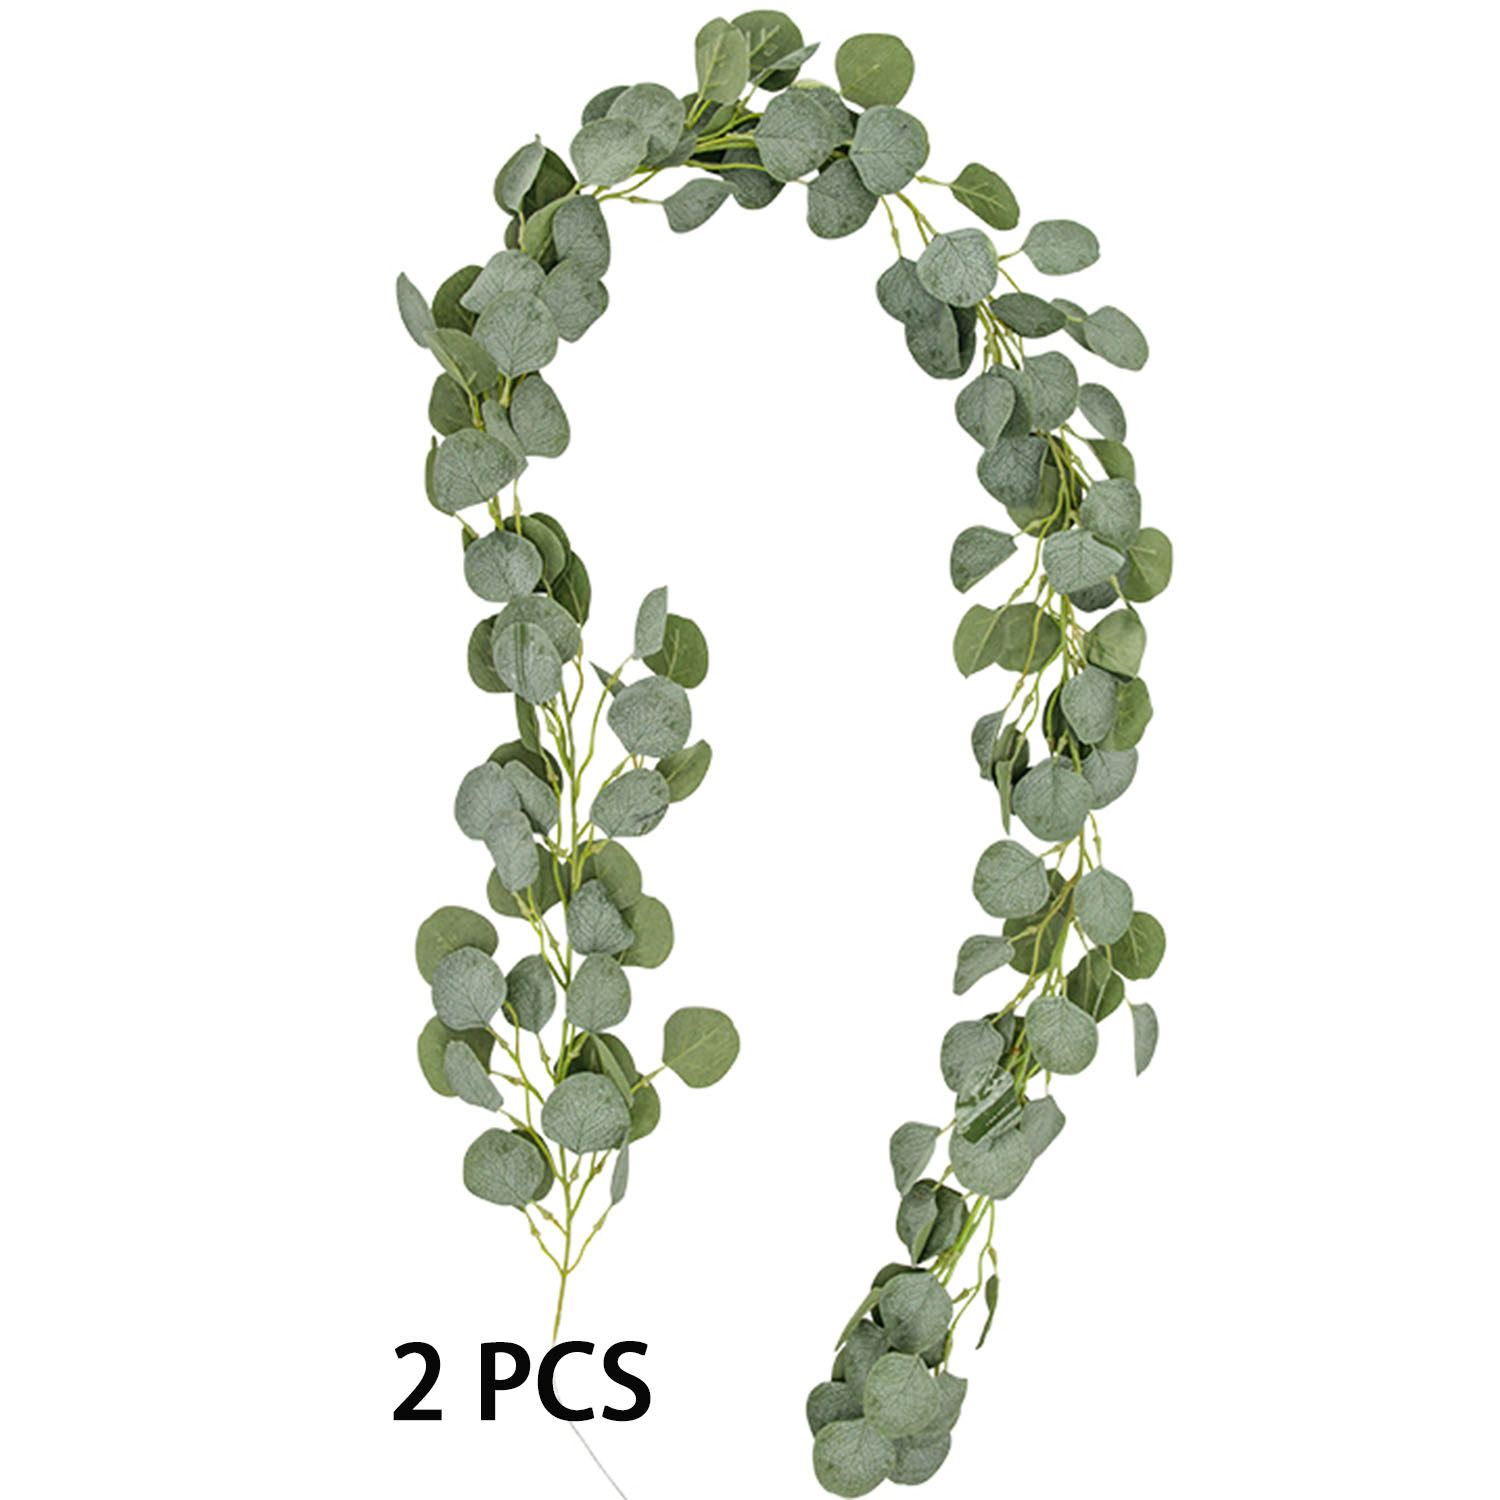 Naidiler 2 PCS Artificial Eucalyptus Garland Greenery Faux Eucalyptus Leaves in Frosted/Grayed Green Vines for Wedding Party Home (12 Ft)